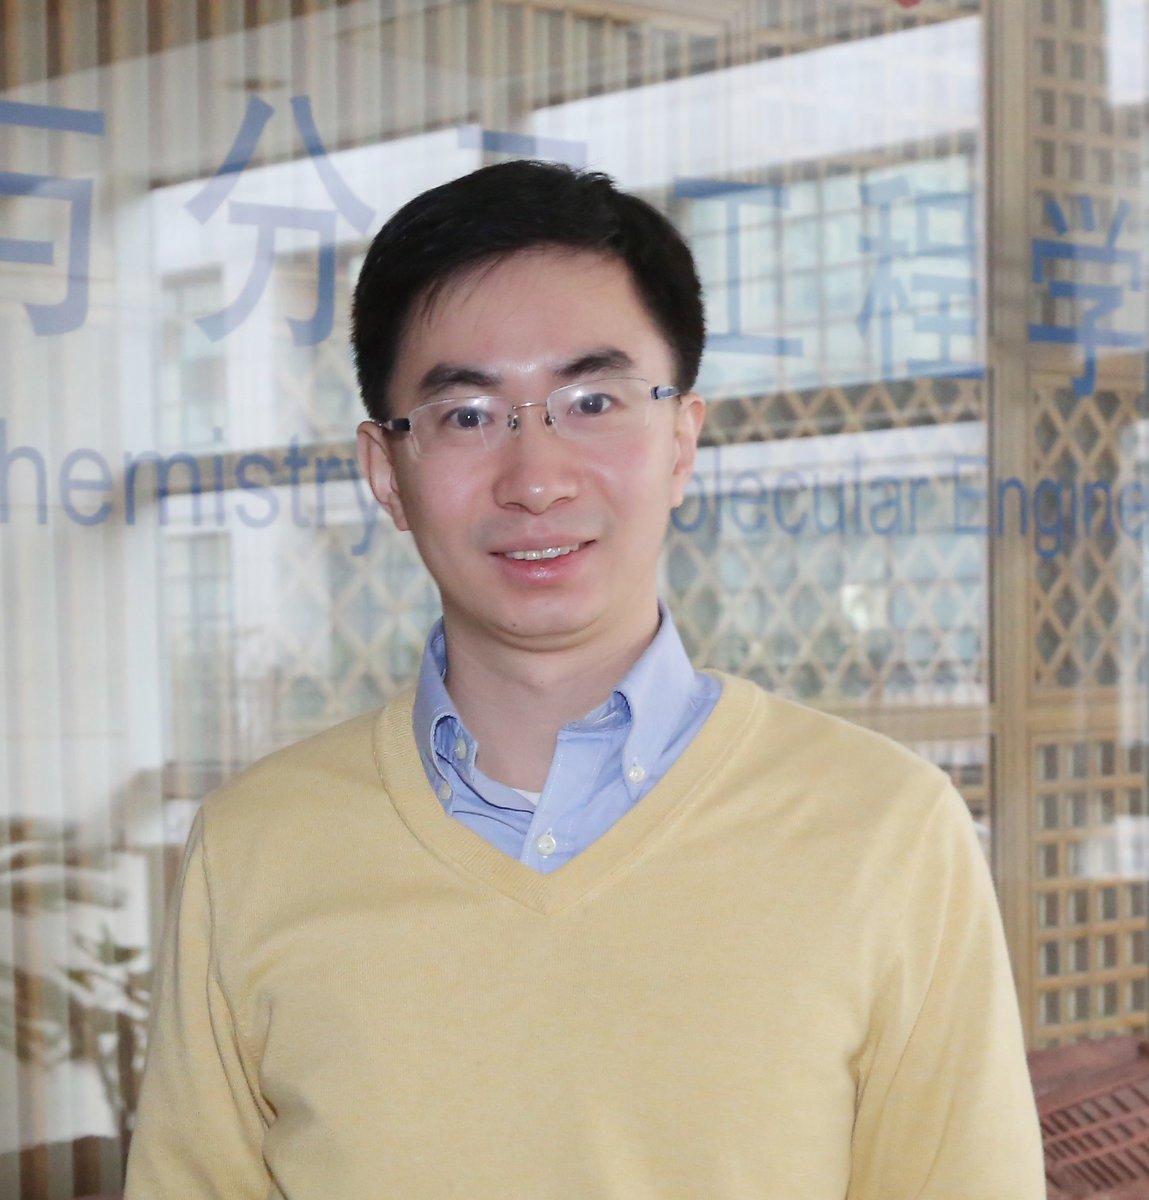 I am thrilled to announce a new Topic Editor @BioconjChem: Prof. Peng Zou from Peking Univ! @PKU1898 Prof. Zou brings expertise in protein engineering, bioorthogonal chemistry, and photocatalytic labeling of RNA and proteins. #cent12 zoulab.org  @ACSPublications 👏